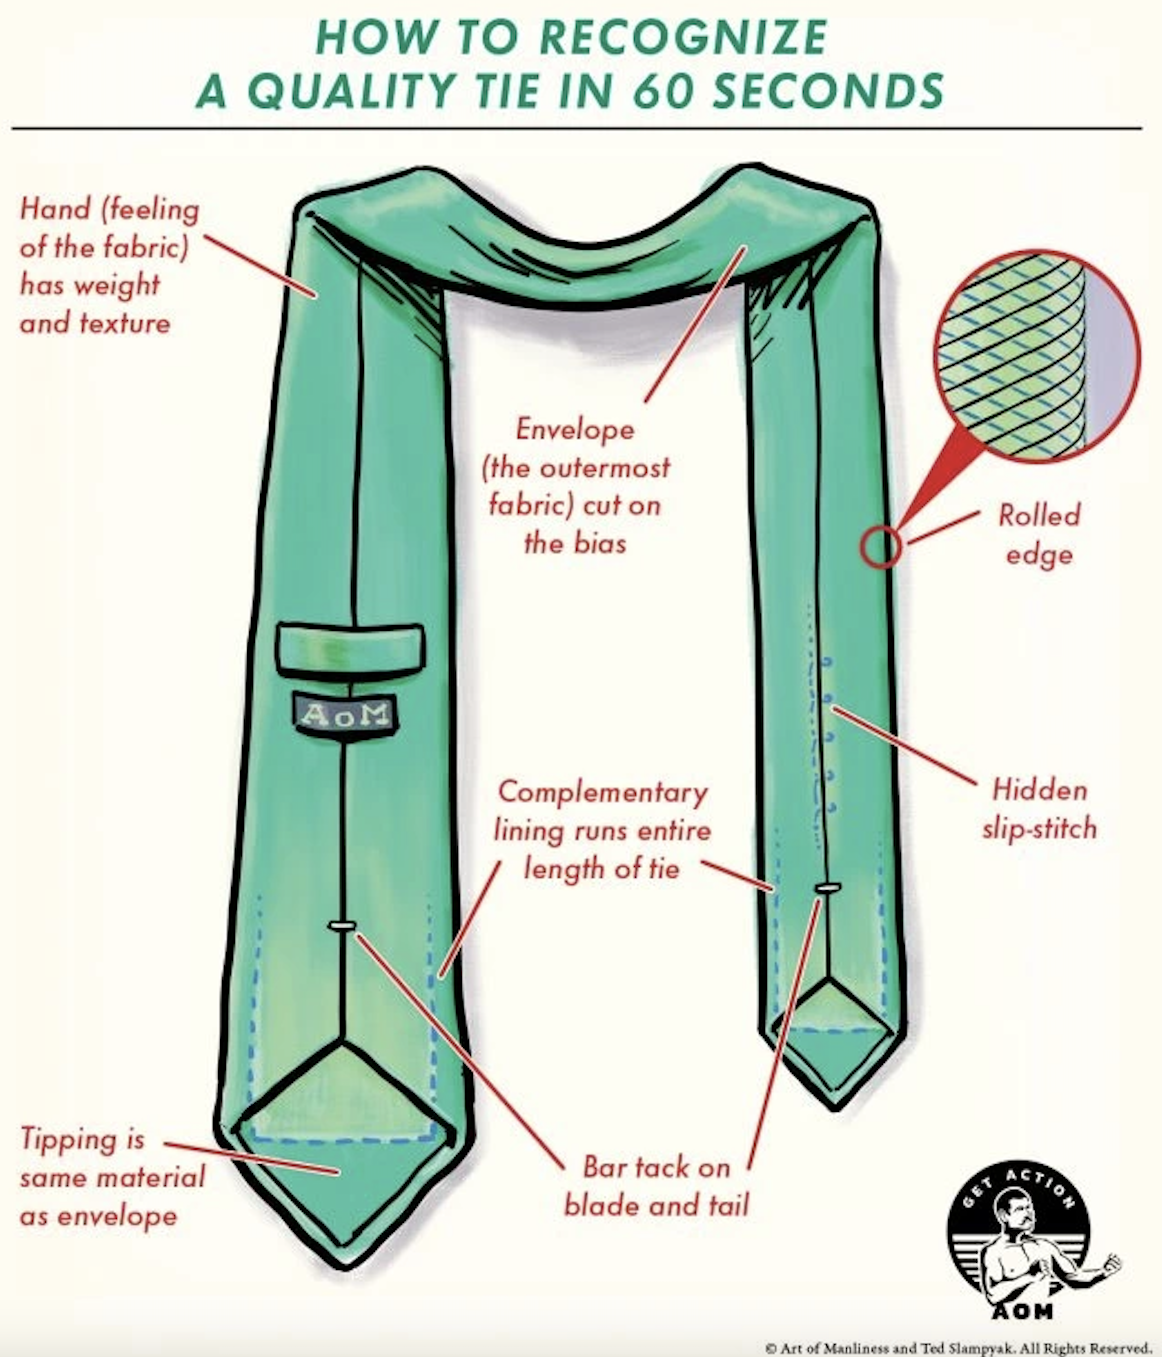 how to be a man - tie - How To Recognize A Quality Tie In 60 Seconds Hand fooling of the fabric has weight and texture Envelope the outermost fabric cut on the bias Rolled edge Aom Complementary lining runs entire length of tie Hidden slipstitch Tipping i